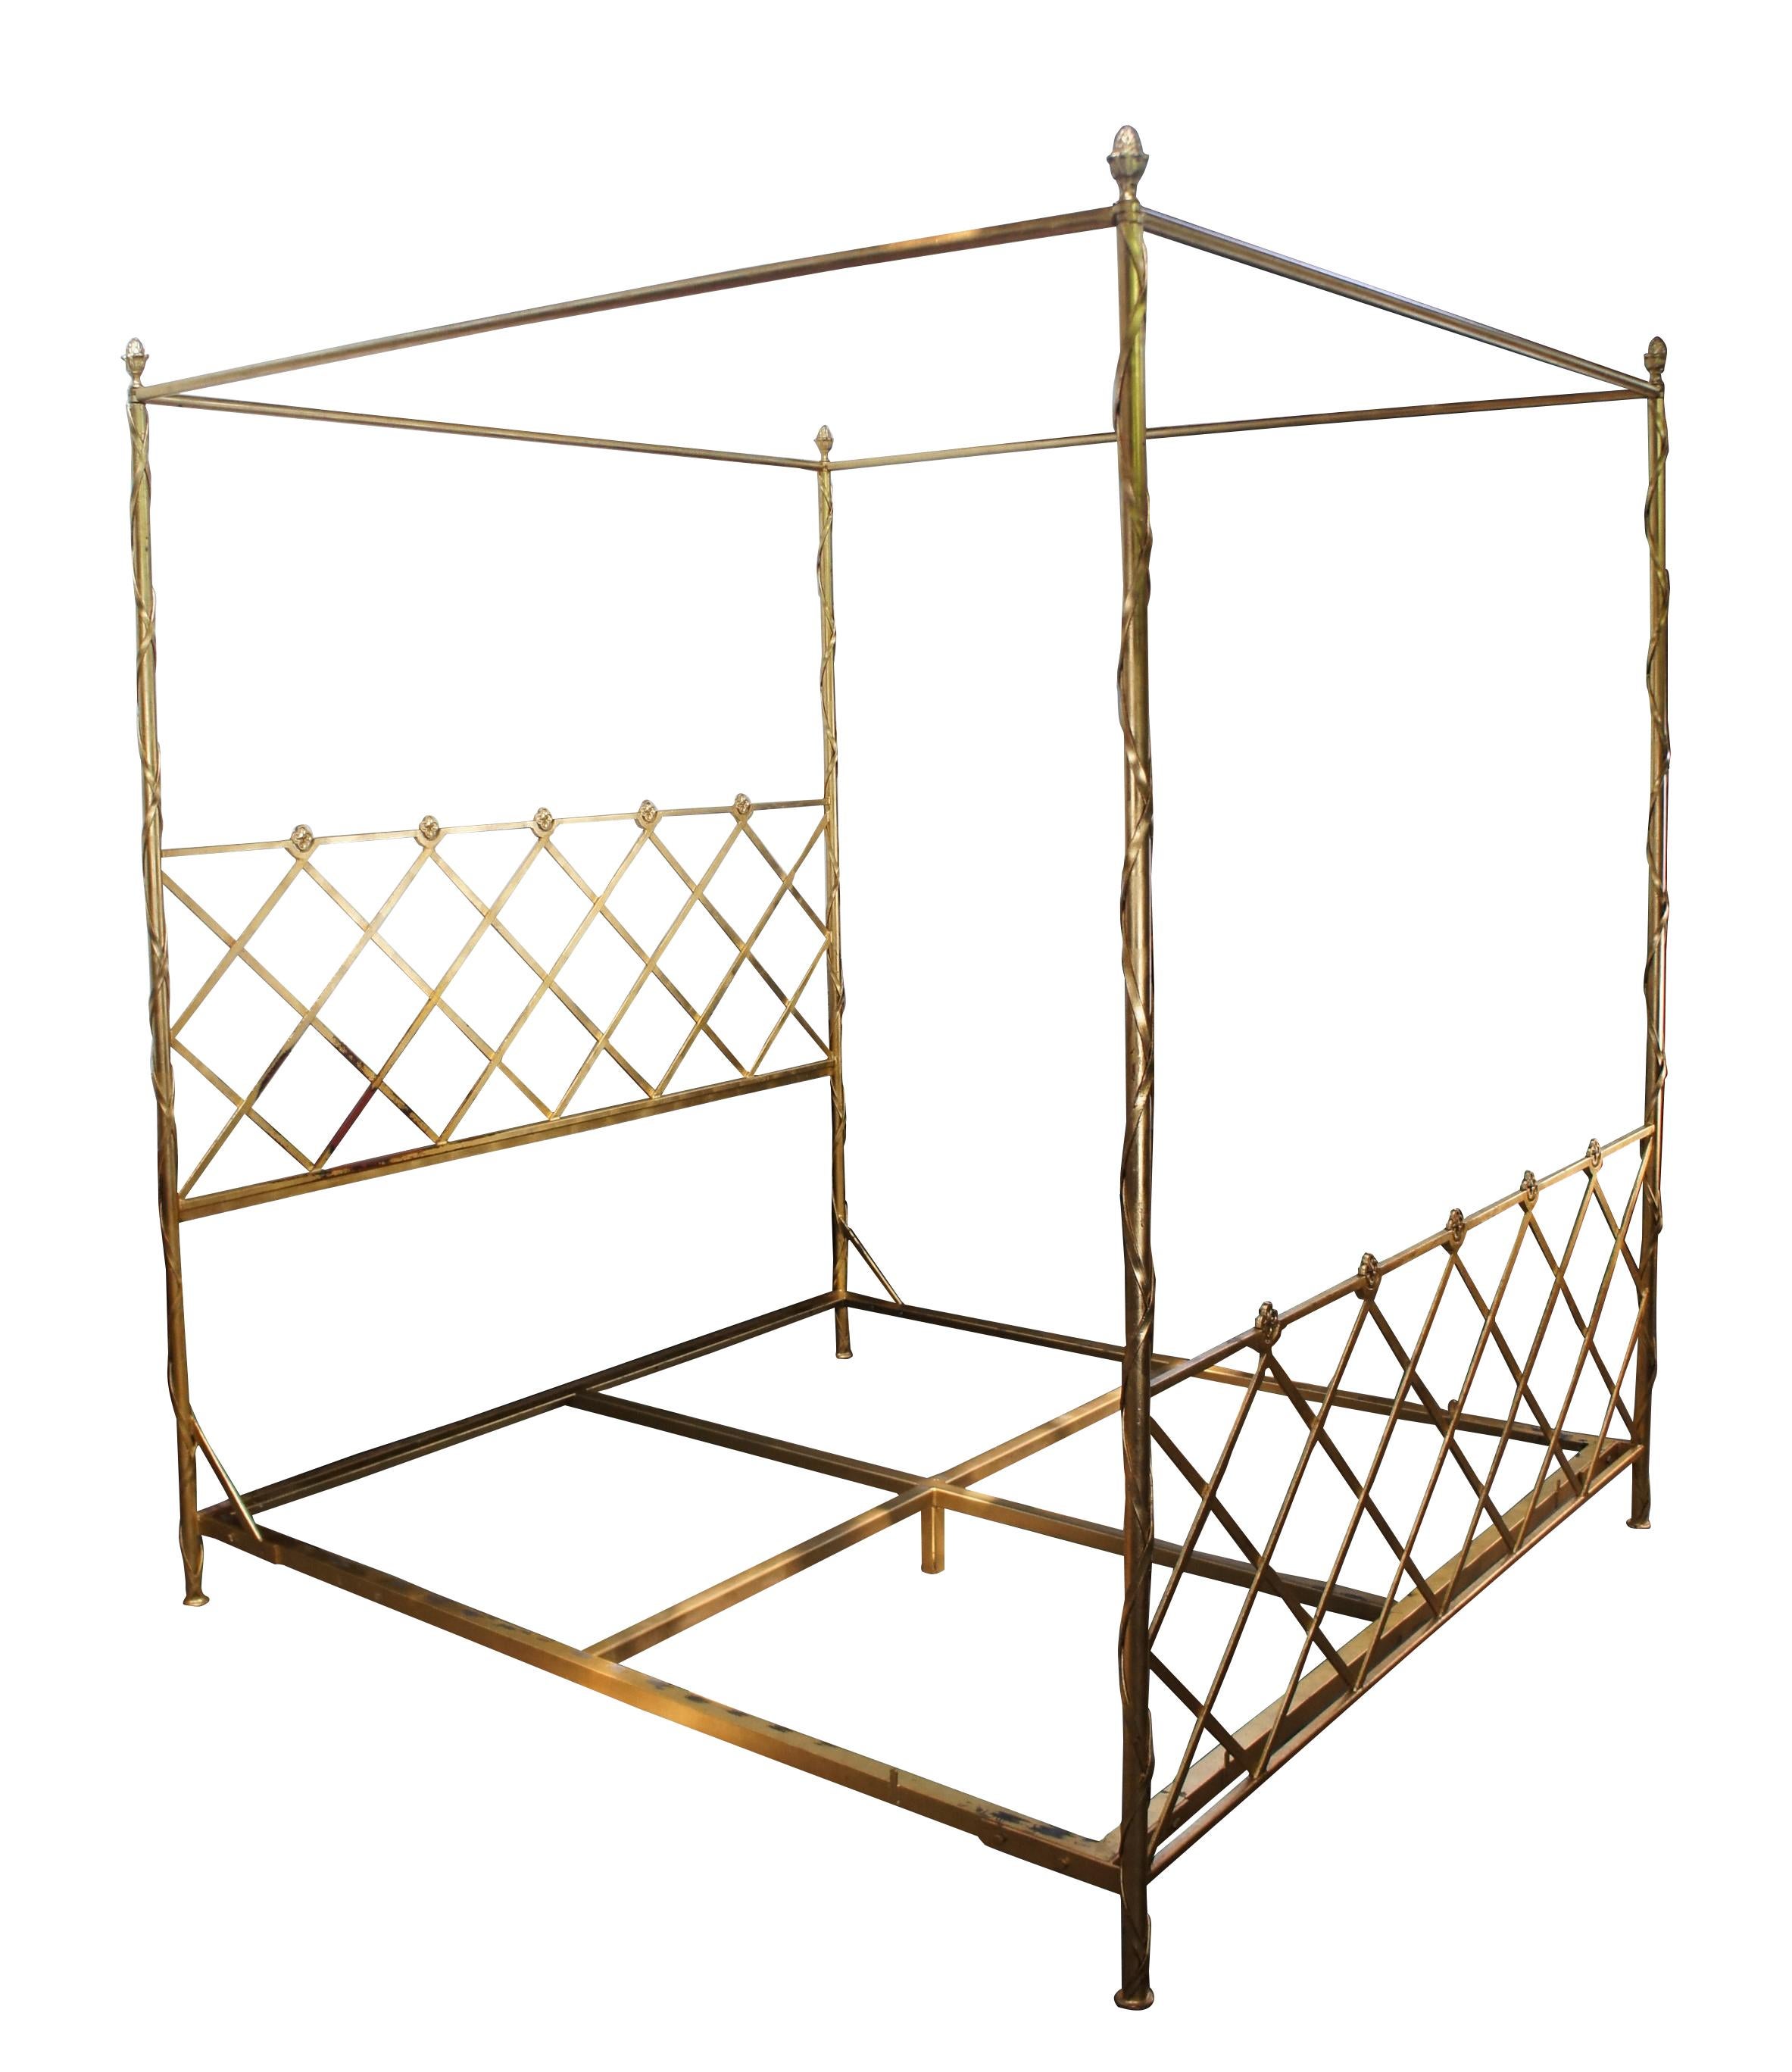 An impressive King size canopy bed.  Drawing inspiration from Italian and French styling. Made from iron with a golf leaf finish.  Features lattice medallion head and foot boards between neoclassical ribboned posts with acorn finials.  The Canopy or